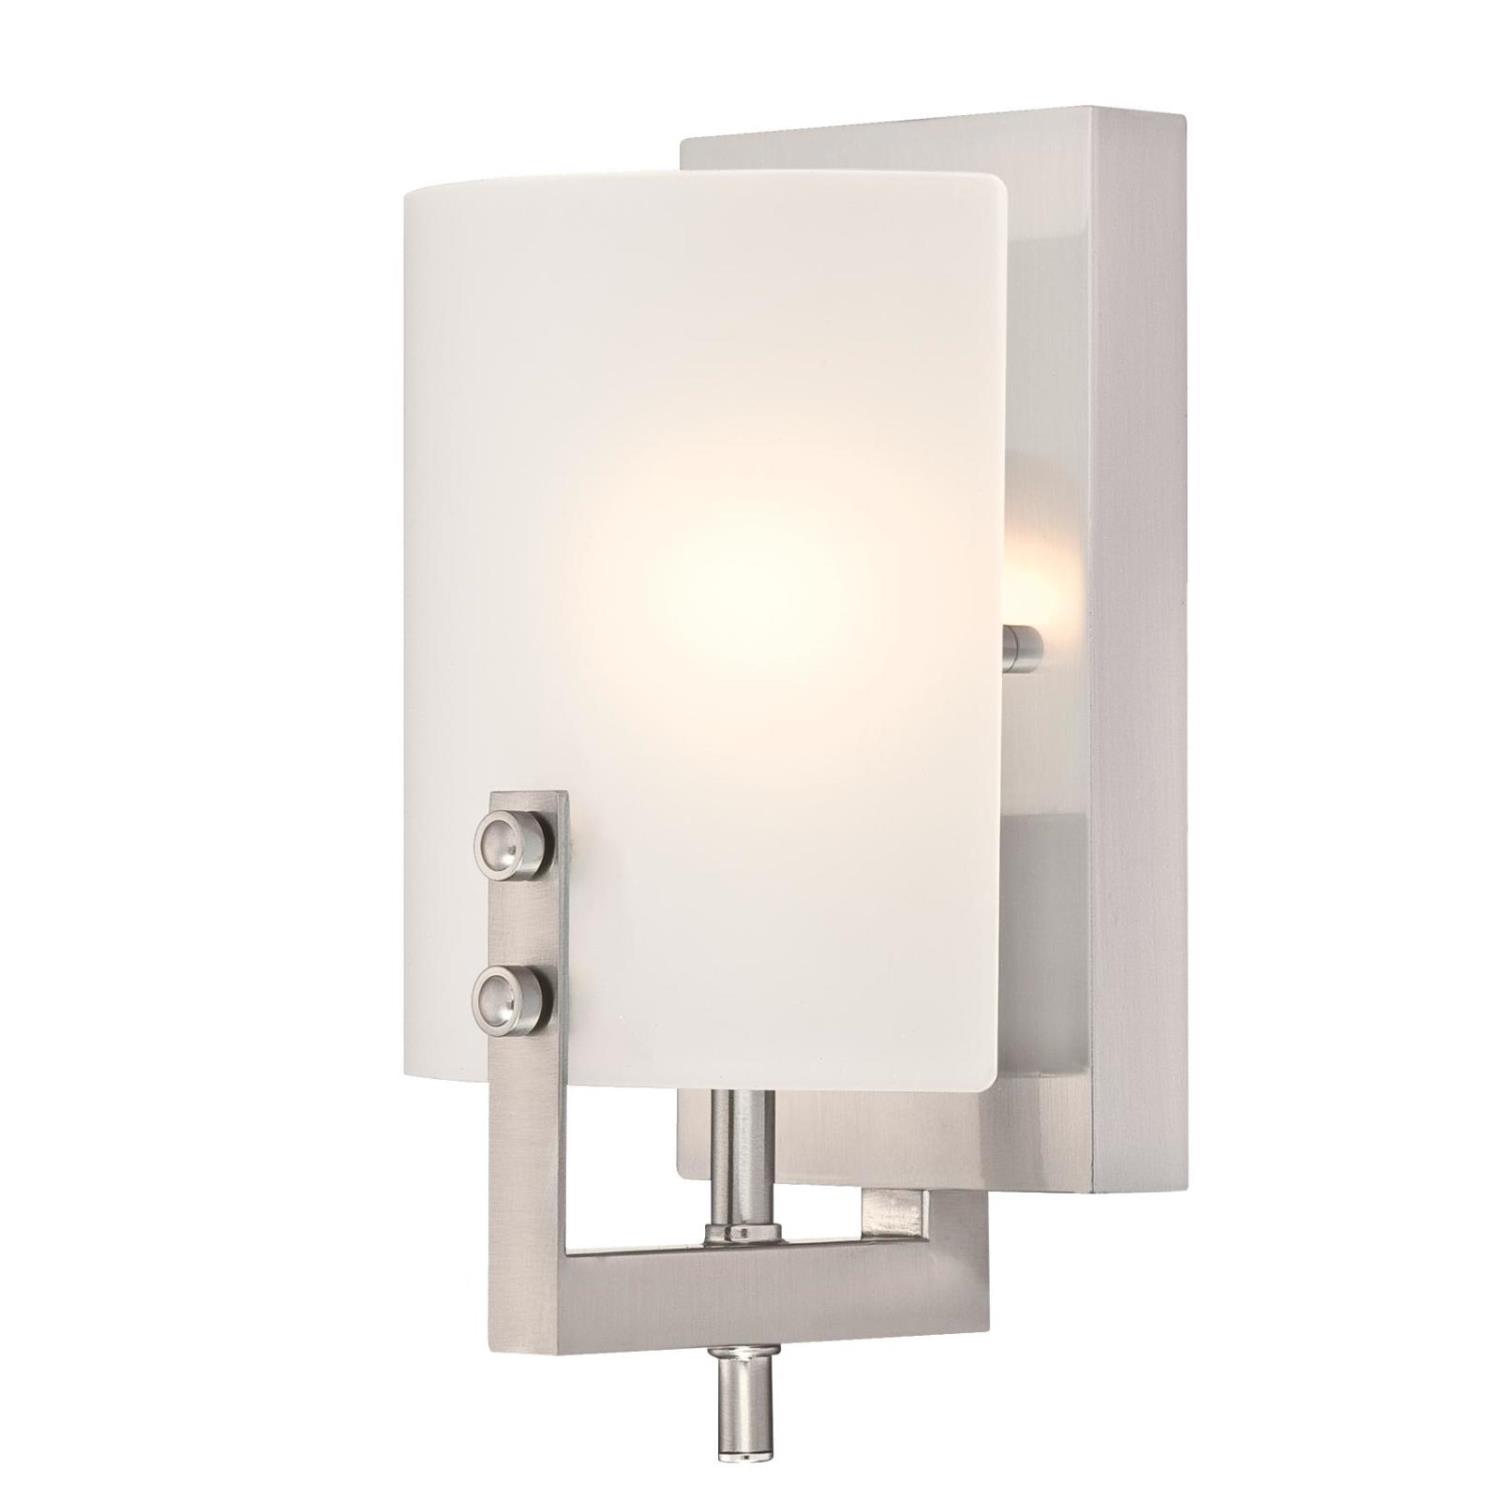 1 Light Wall Fixture Brushed Nickel Finish with Frosted Glass